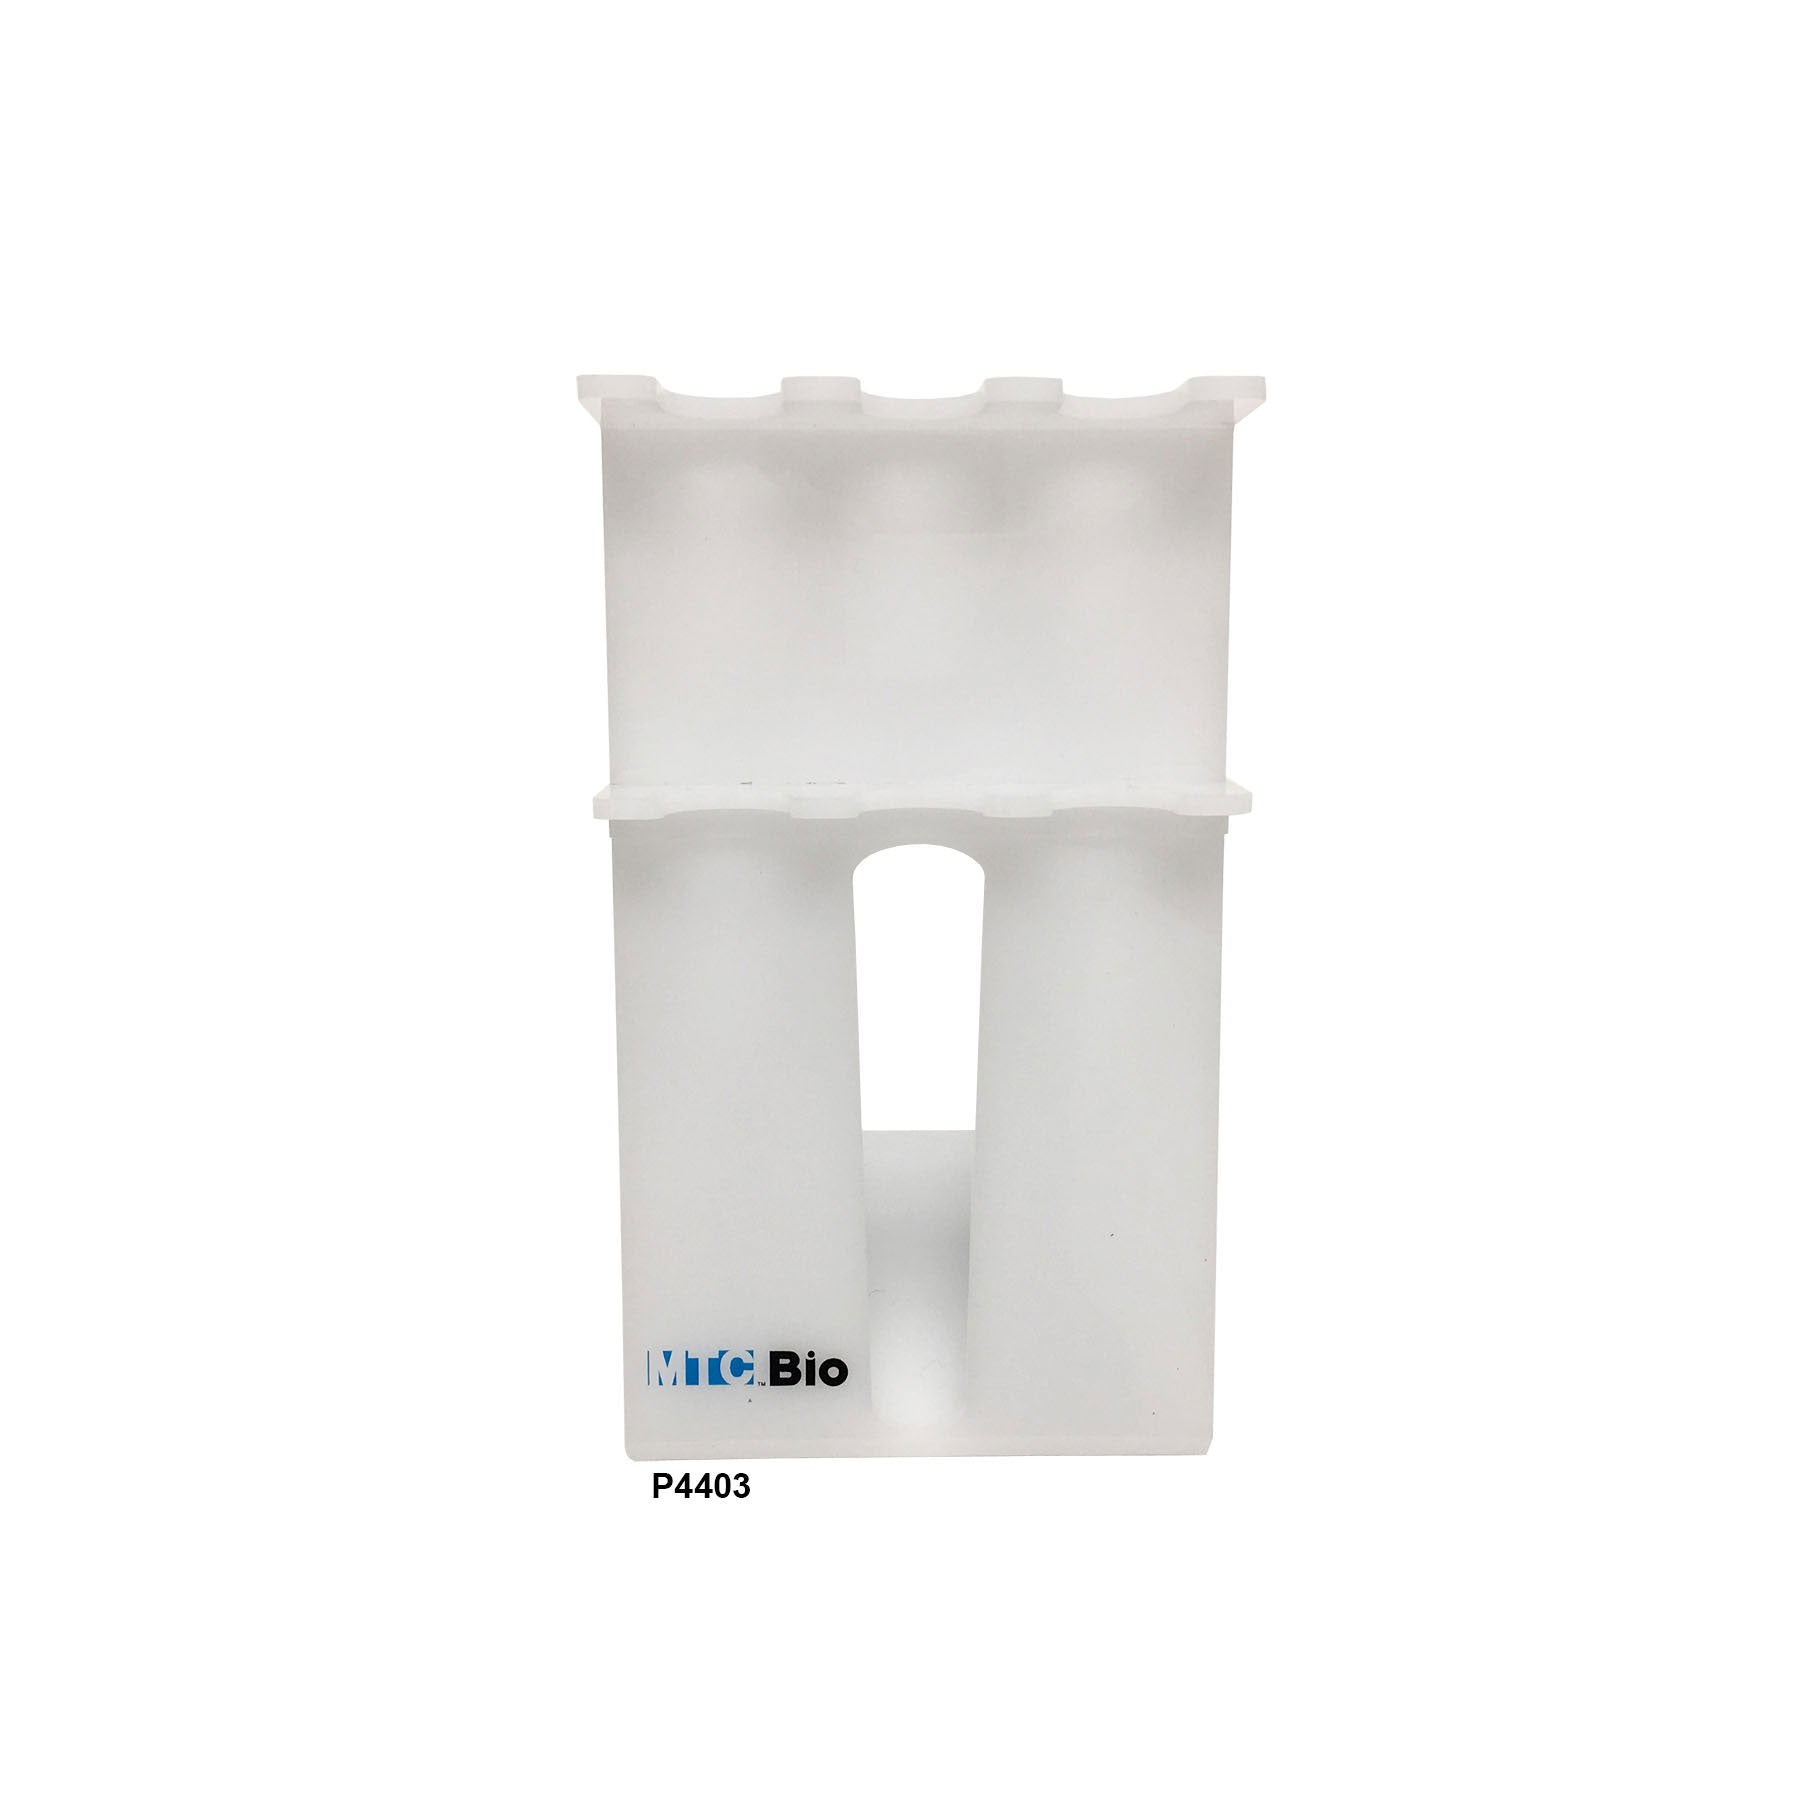 MTC Bio P4403, Surestand Pipette Stand for 3 Pipettes, Up To One Multi-Channel, Acrylic